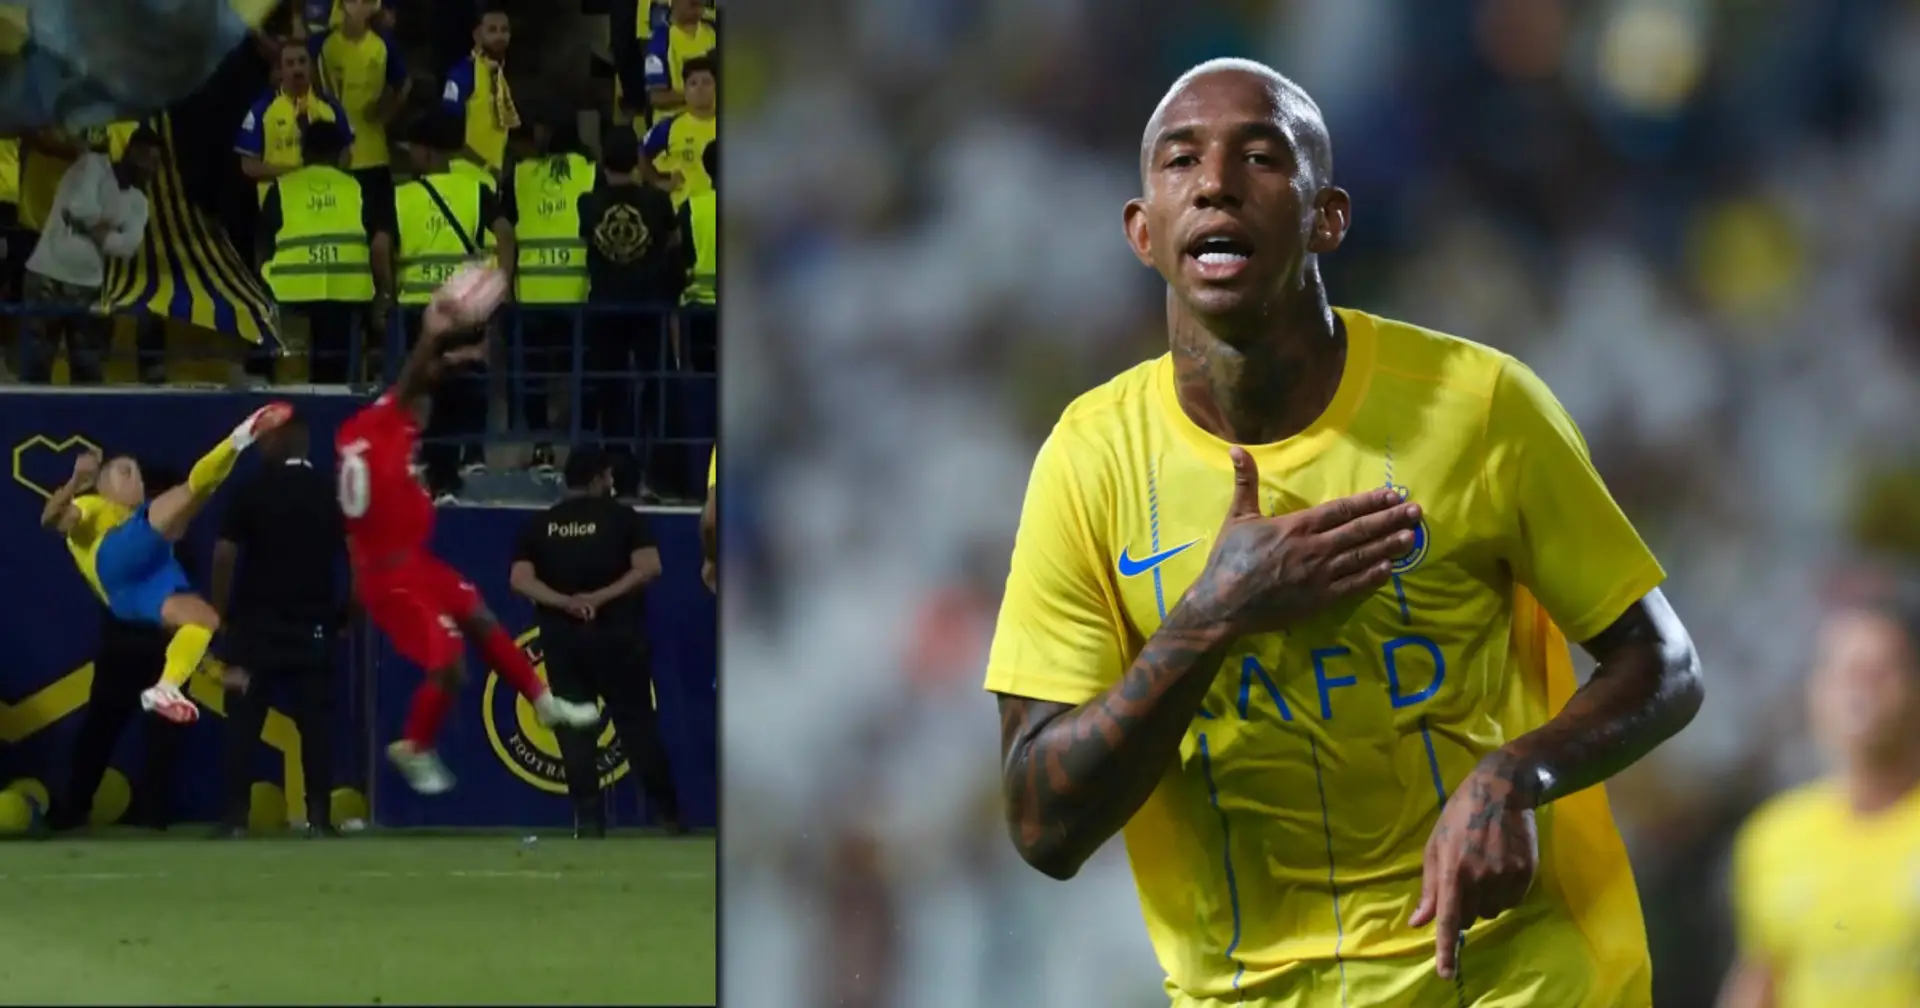 Al Nassr carried into Asian Champions League group stage in stunning comeback by player they might have to discard — not Cristiano